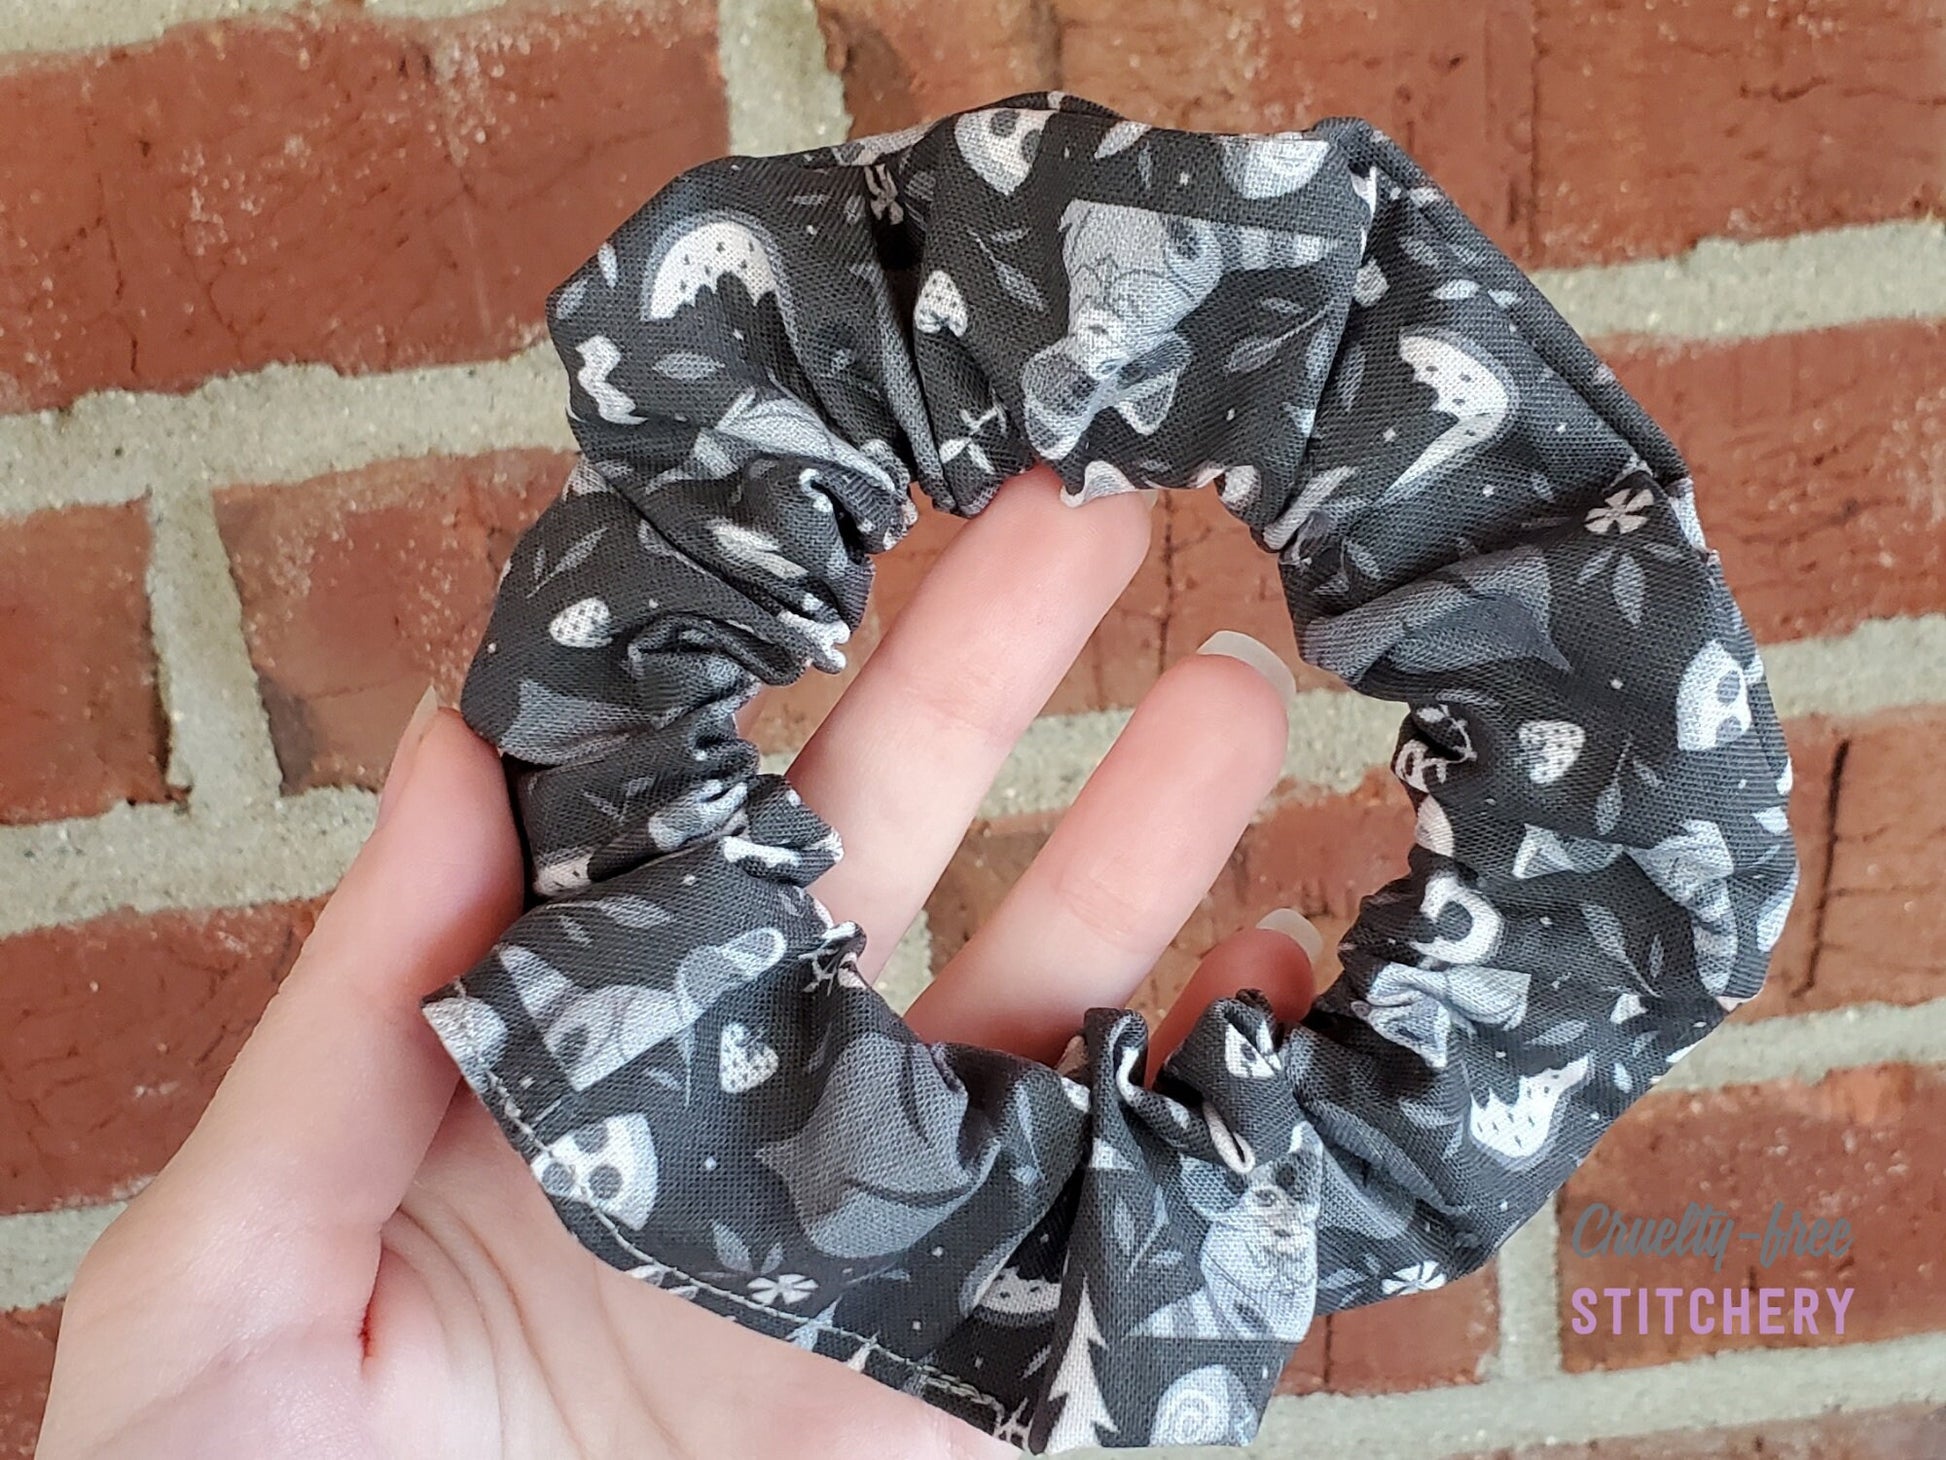 Black and grey raccoons print scrunchie. Features cute raccoons, trash bags, and scattered food. Pictured in my hand on a red brick background.